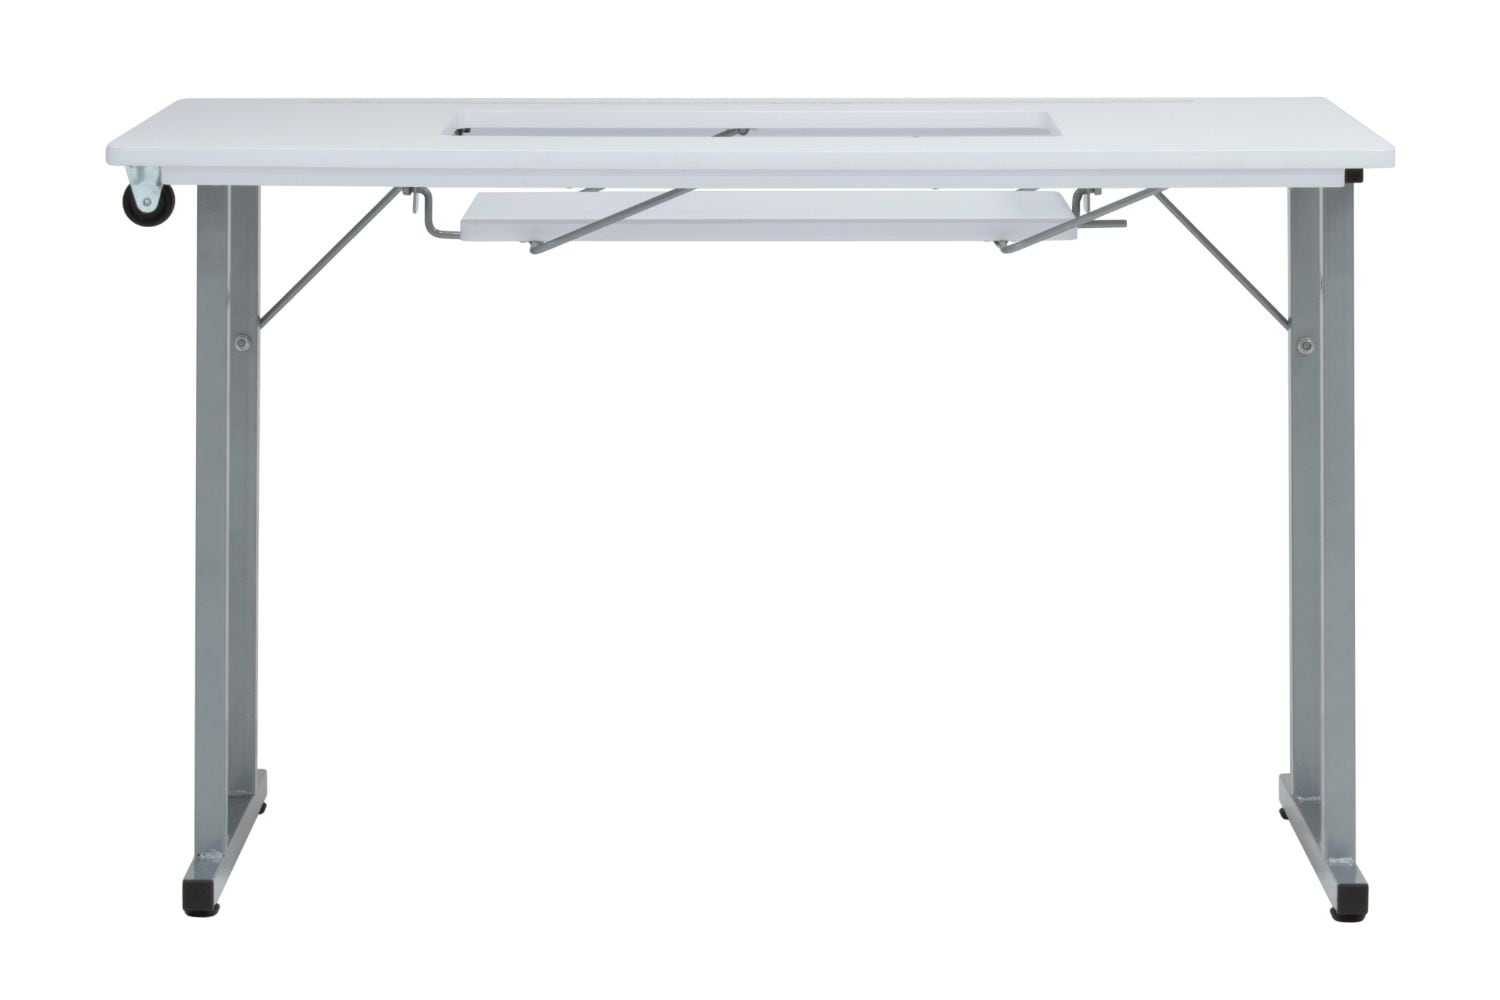 Rollaway II Compact Portable Folding Sewing Table, Silver/White